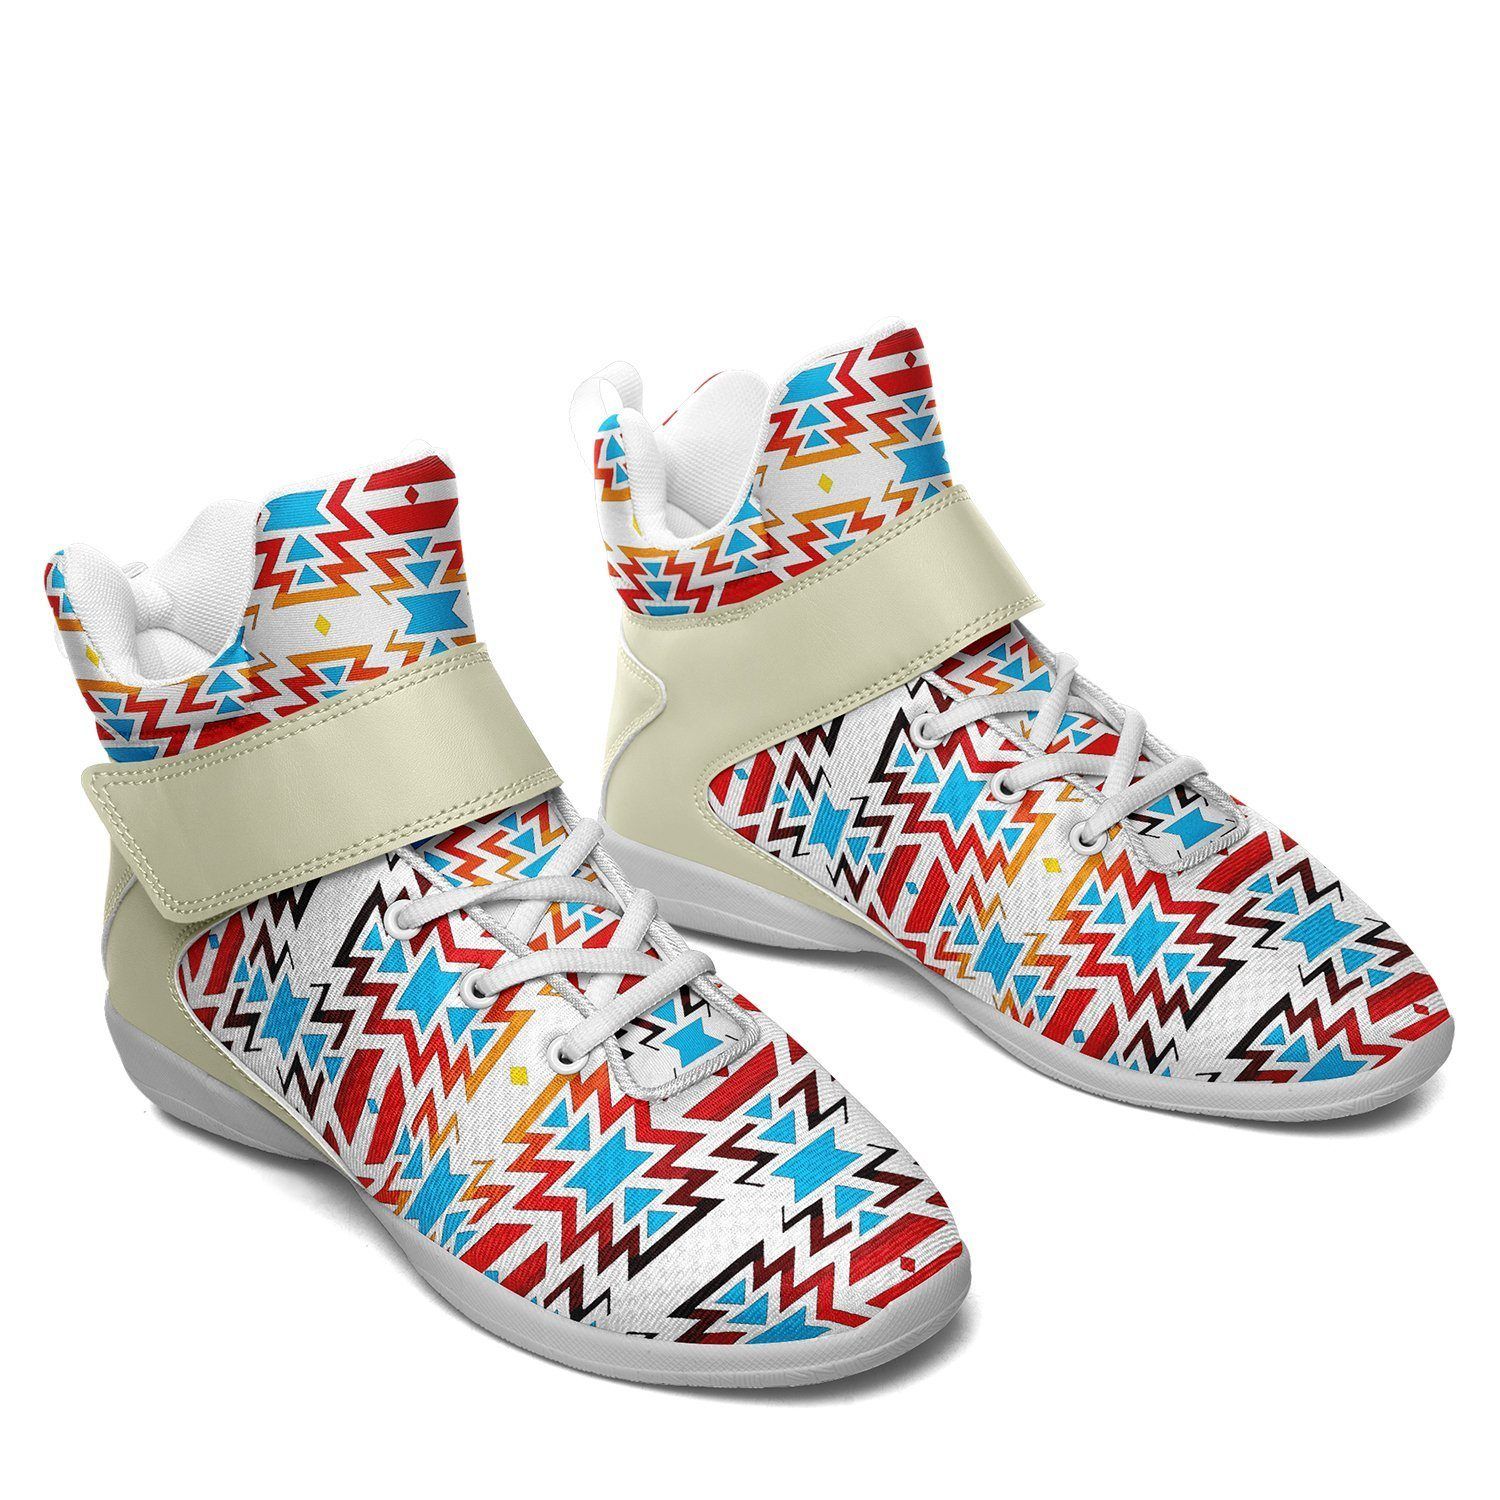 Fire Colors and Sky Ipottaa Basketball / Sport High Top Shoes - White Sole 49 Dzine 